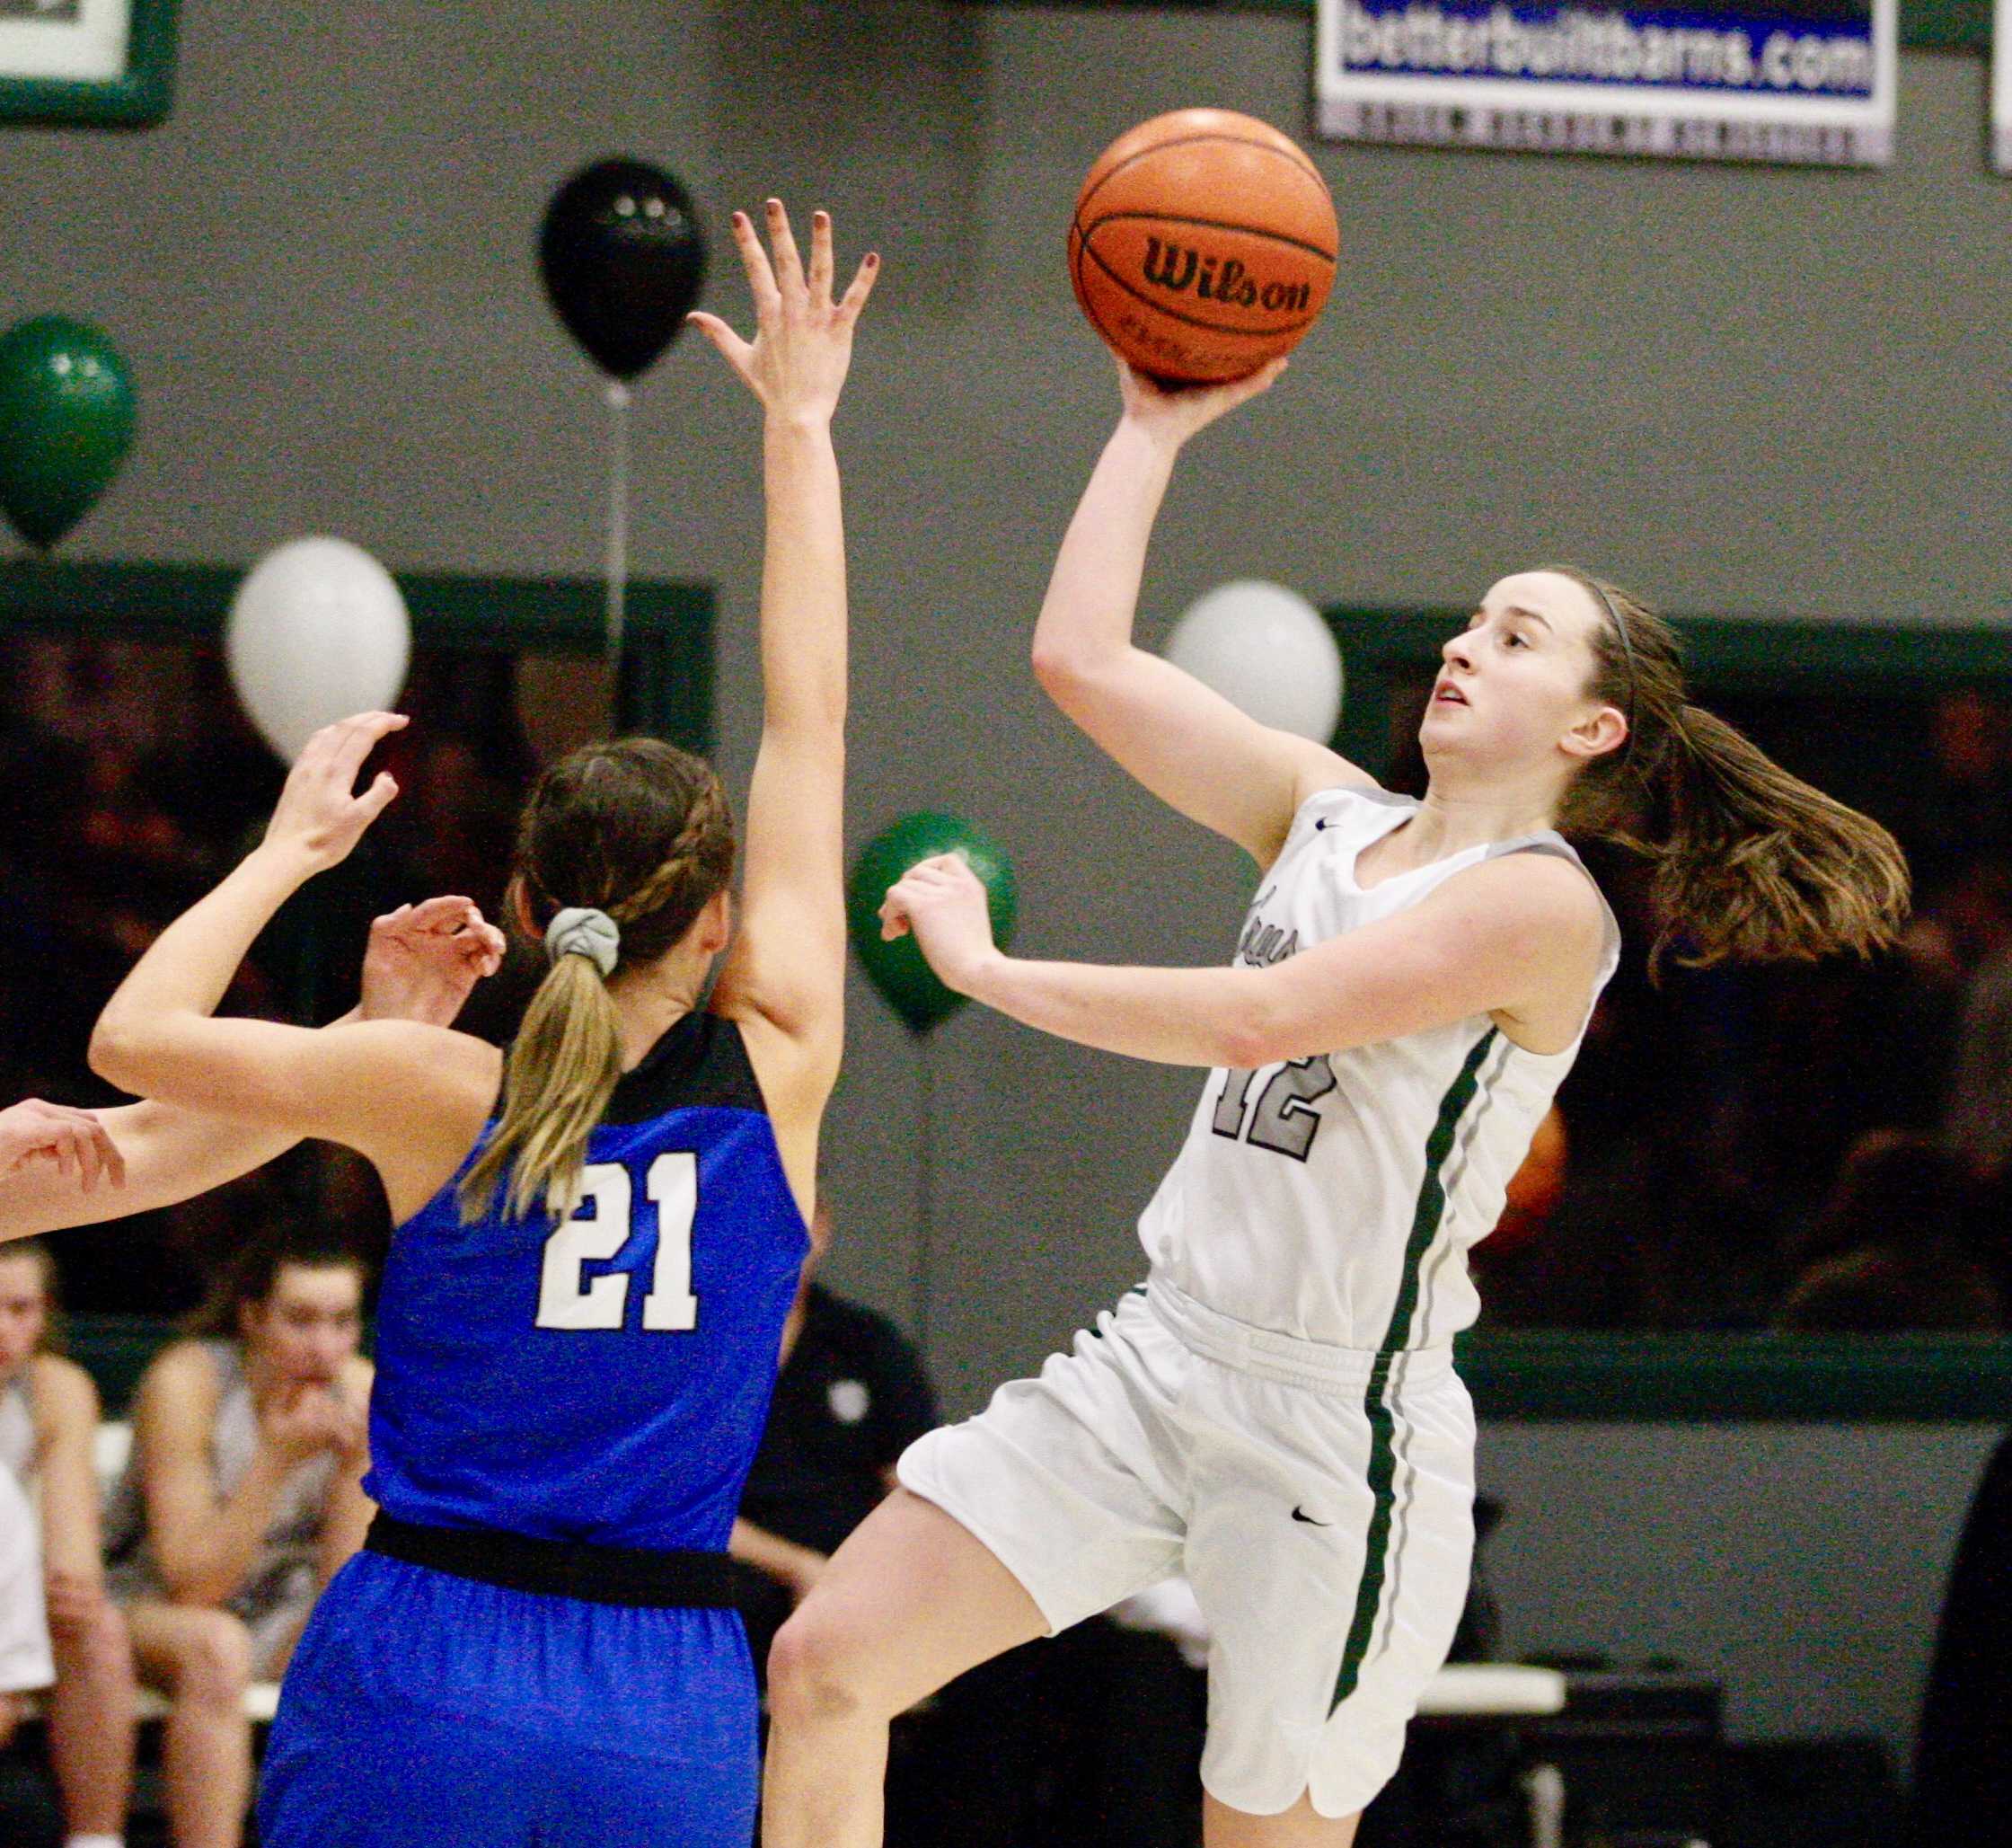 Salem Academy's Kirsten Koehnke drives past Blanchet Catholic's Hailey Ostby for two of her game-high 23 points.